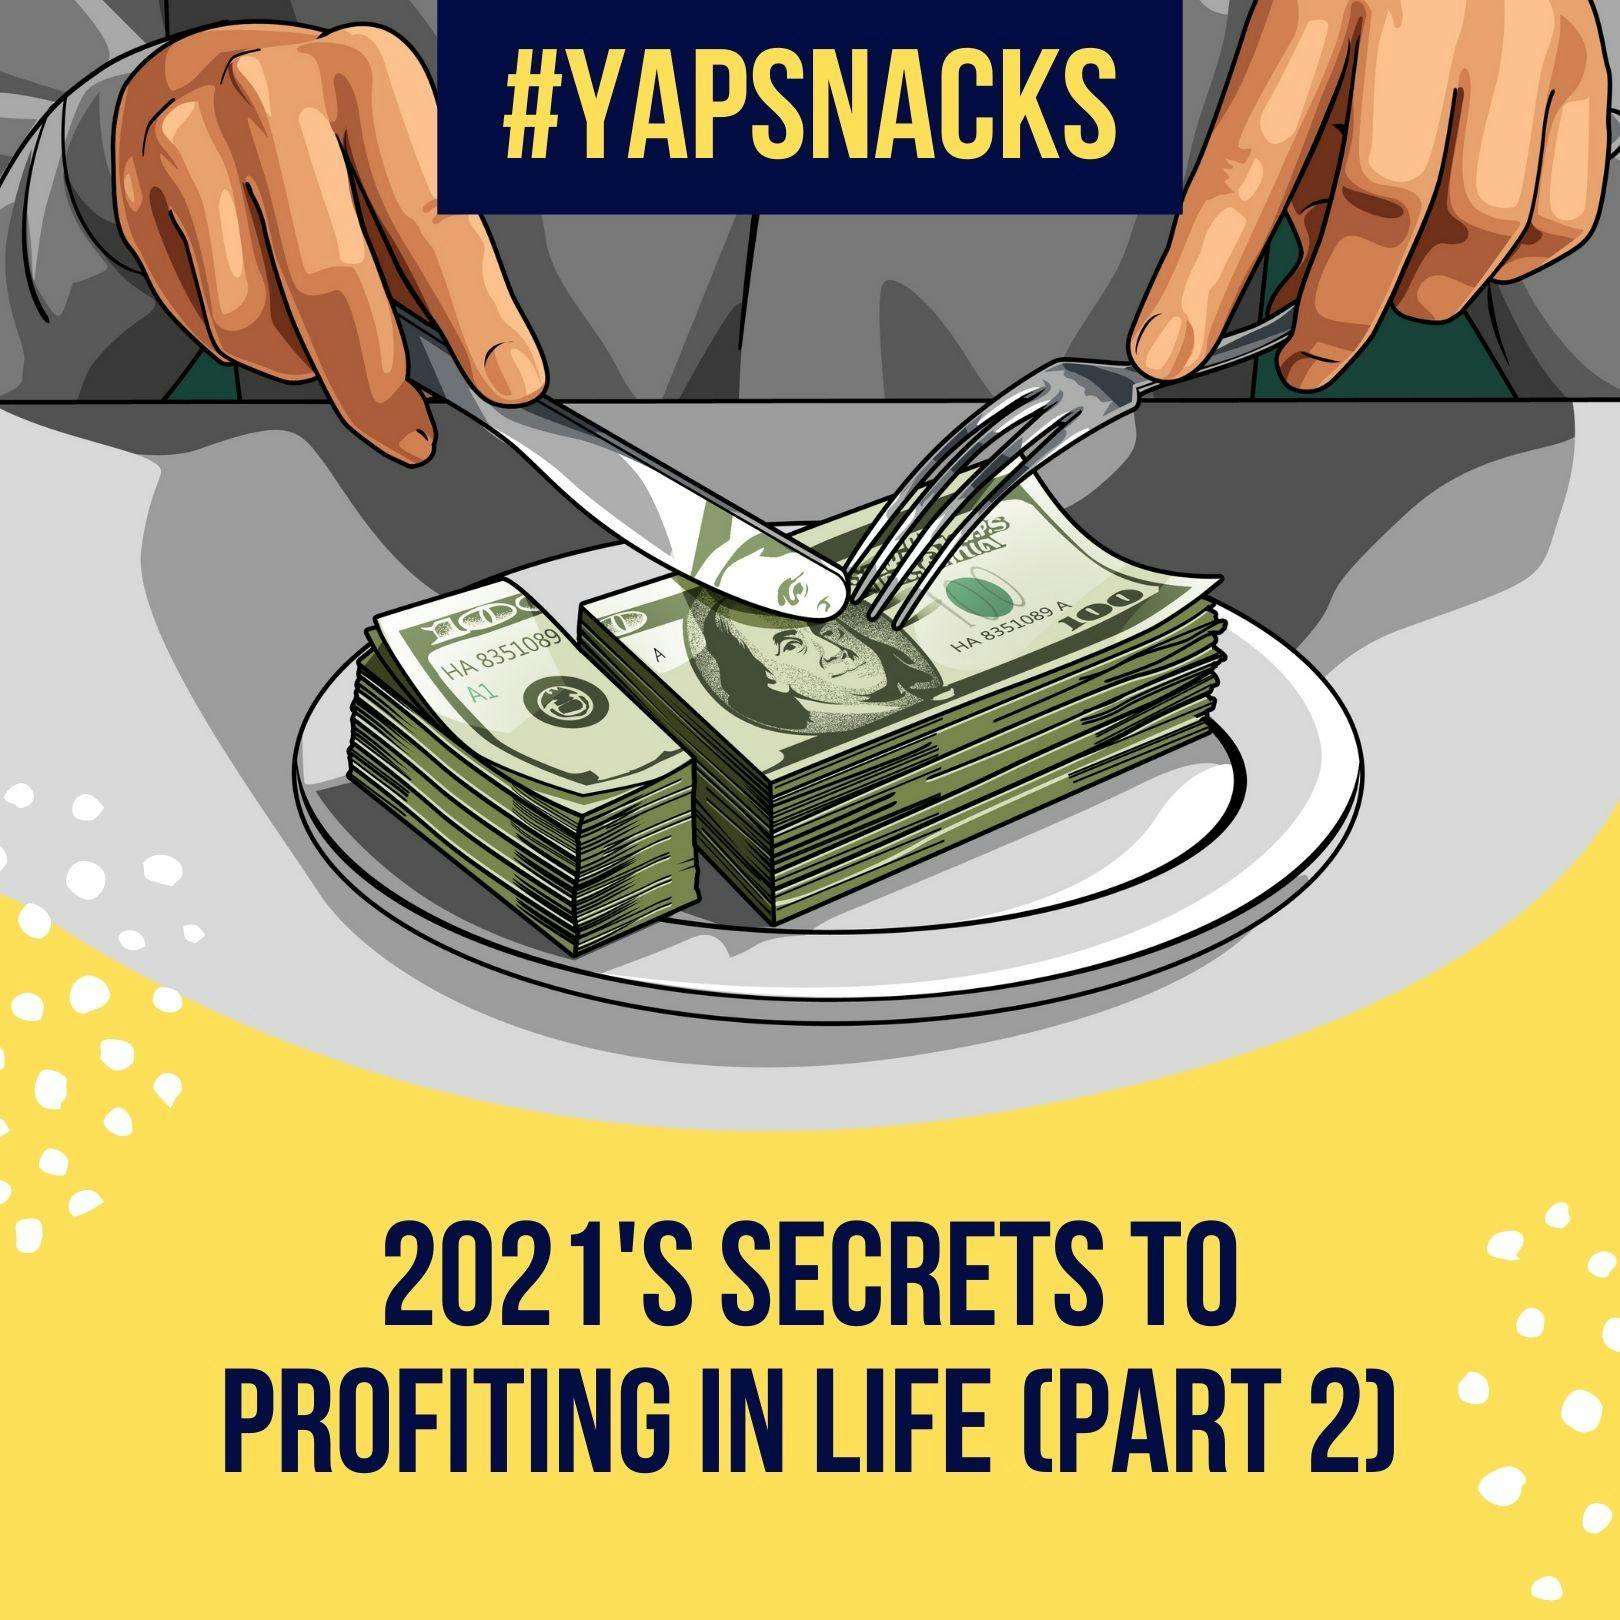 #YAPSnacks: 2021's Secrets to Profiting in Life - Love and Service (Part 2)